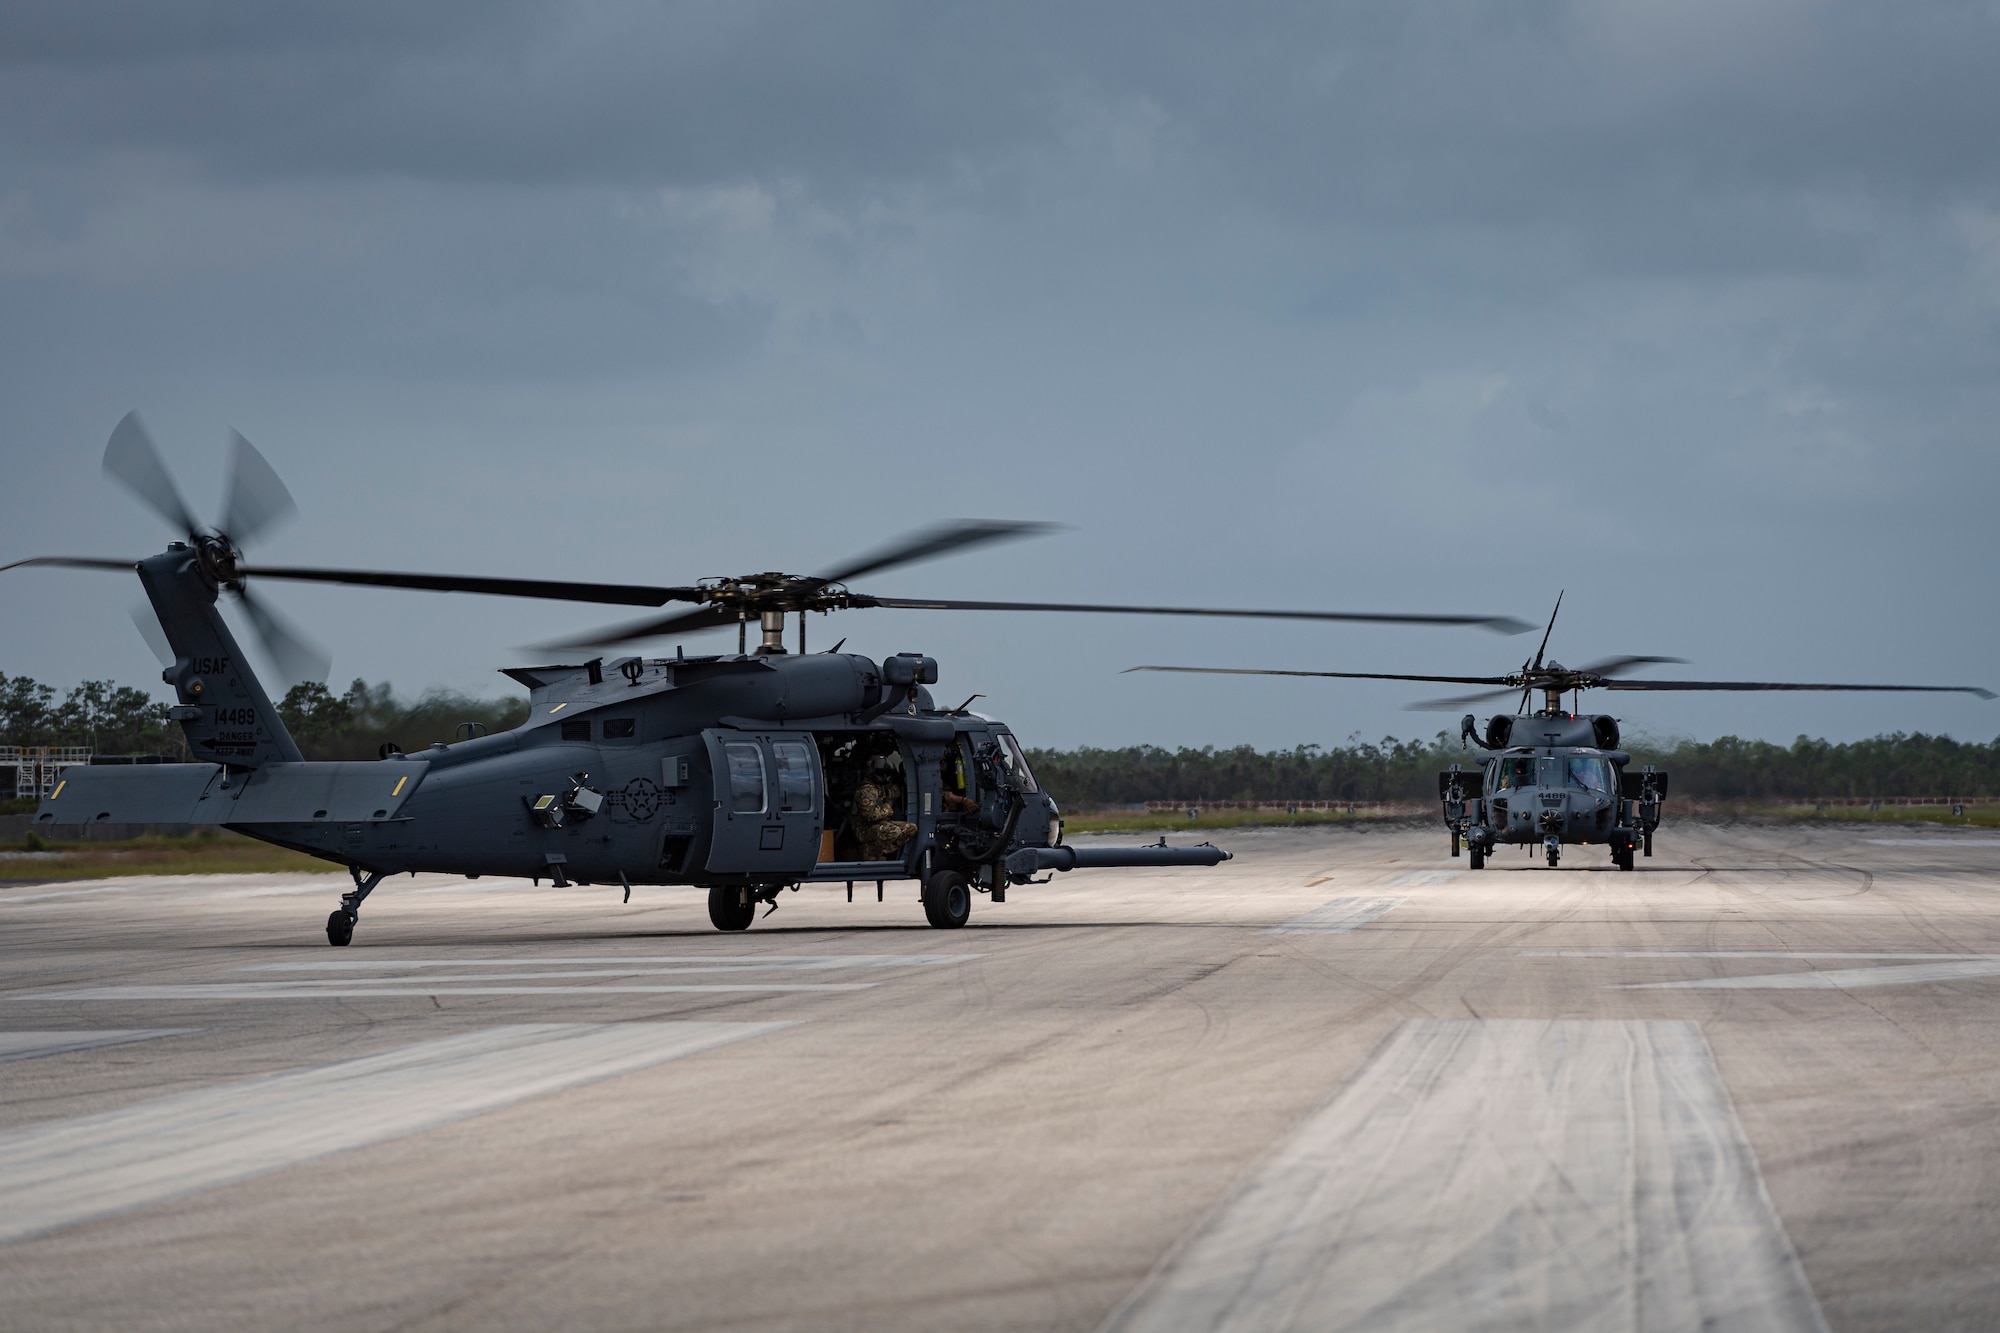 A photo of helicopters preparing for takeoff